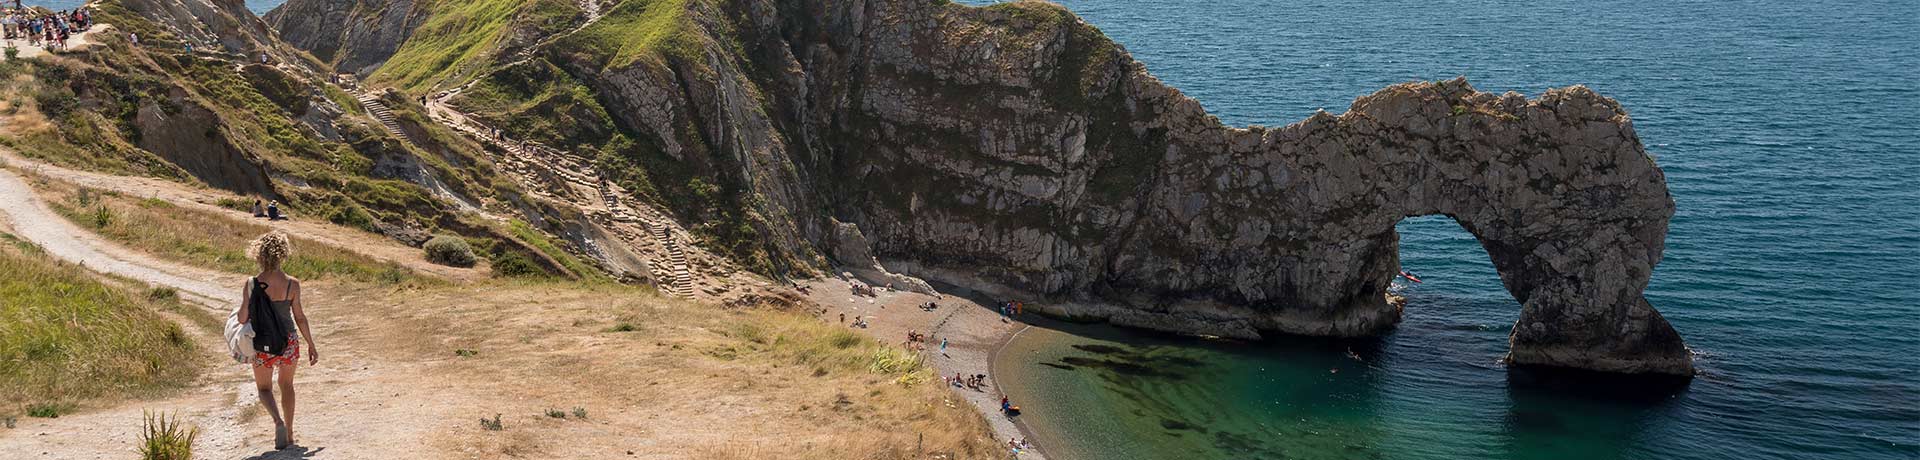 Complete guide to the Dorset coast